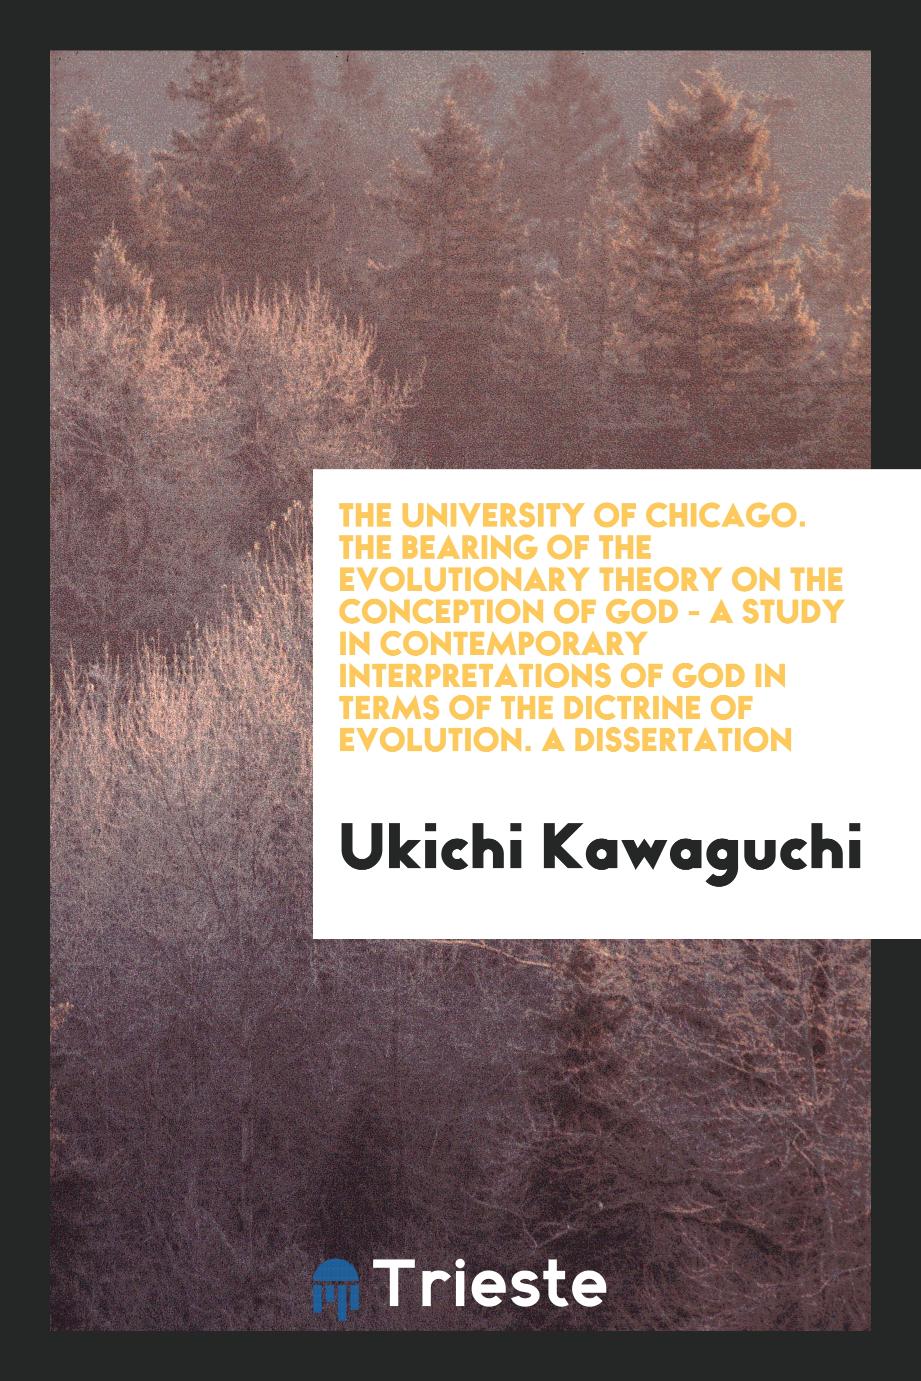 The University of Chicago. The Bearing of the Evolutionary Theory on the Conception of God - A Study in Contemporary Interpretations of God in Terms of the Dictrine of Evolution. A Dissertation